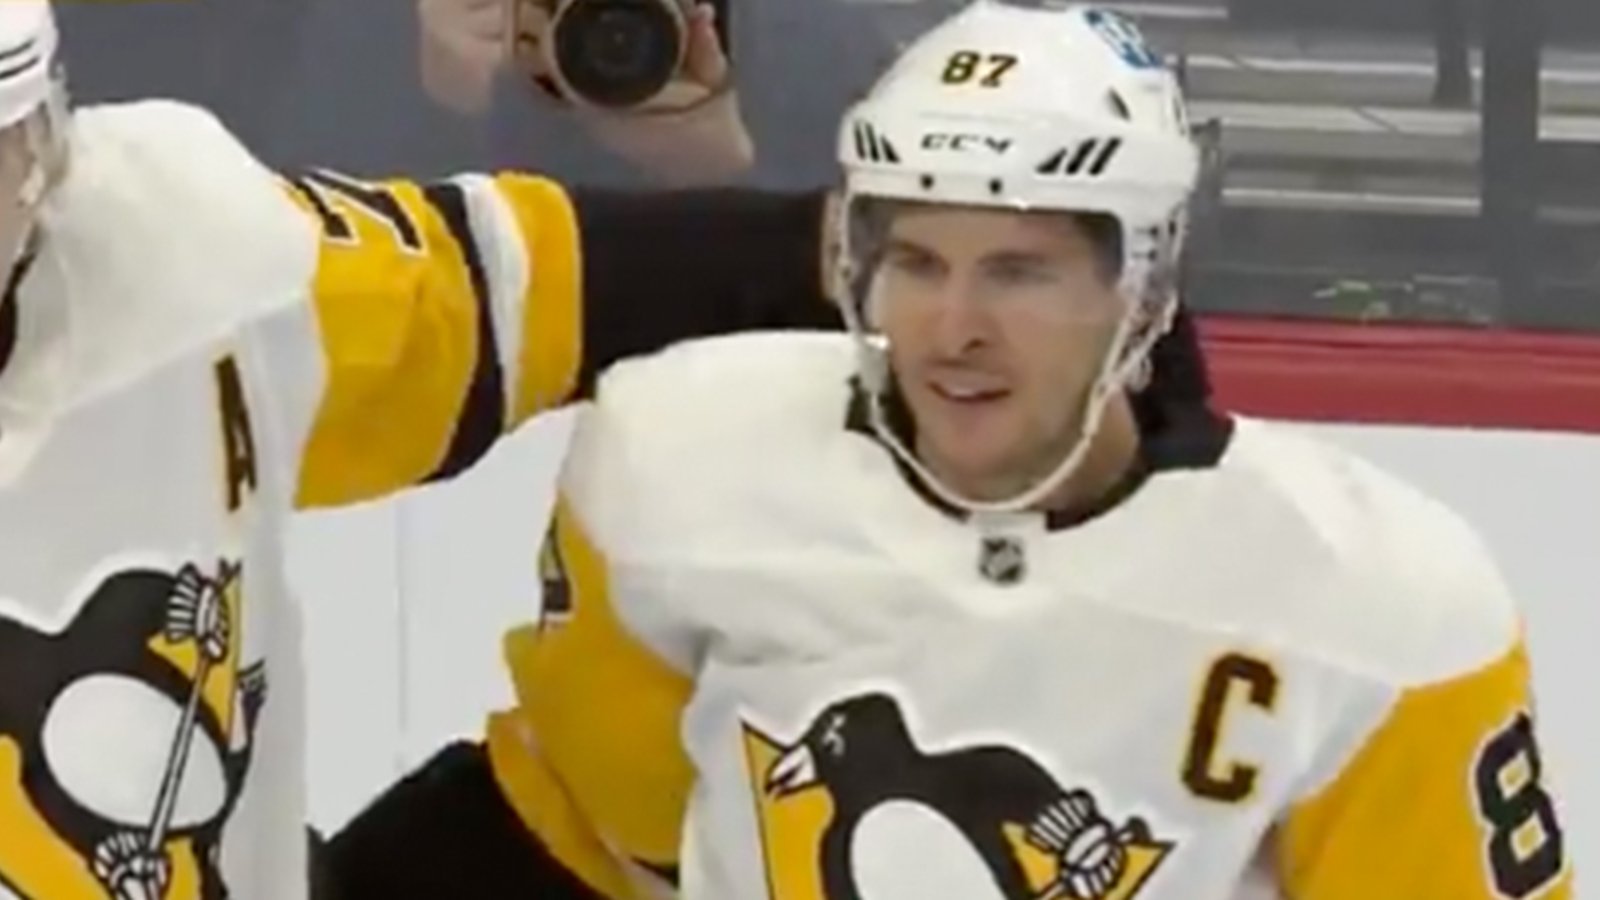 Crosby scores his first of the season in “vintage Crosby” fashion